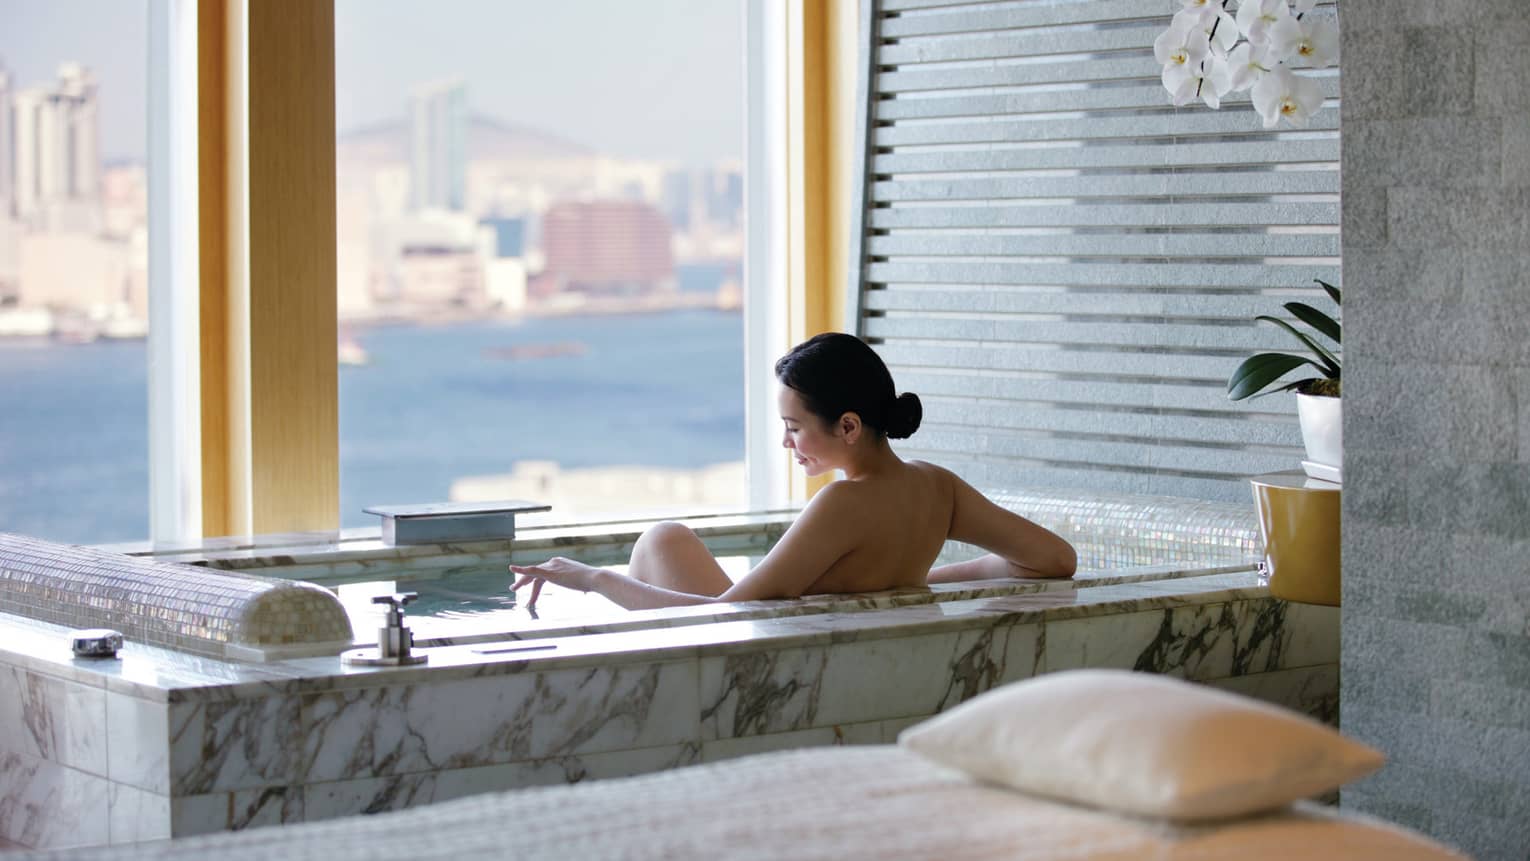 Woman's bare back above marble spa tub in tile bathroom by window with water, city views